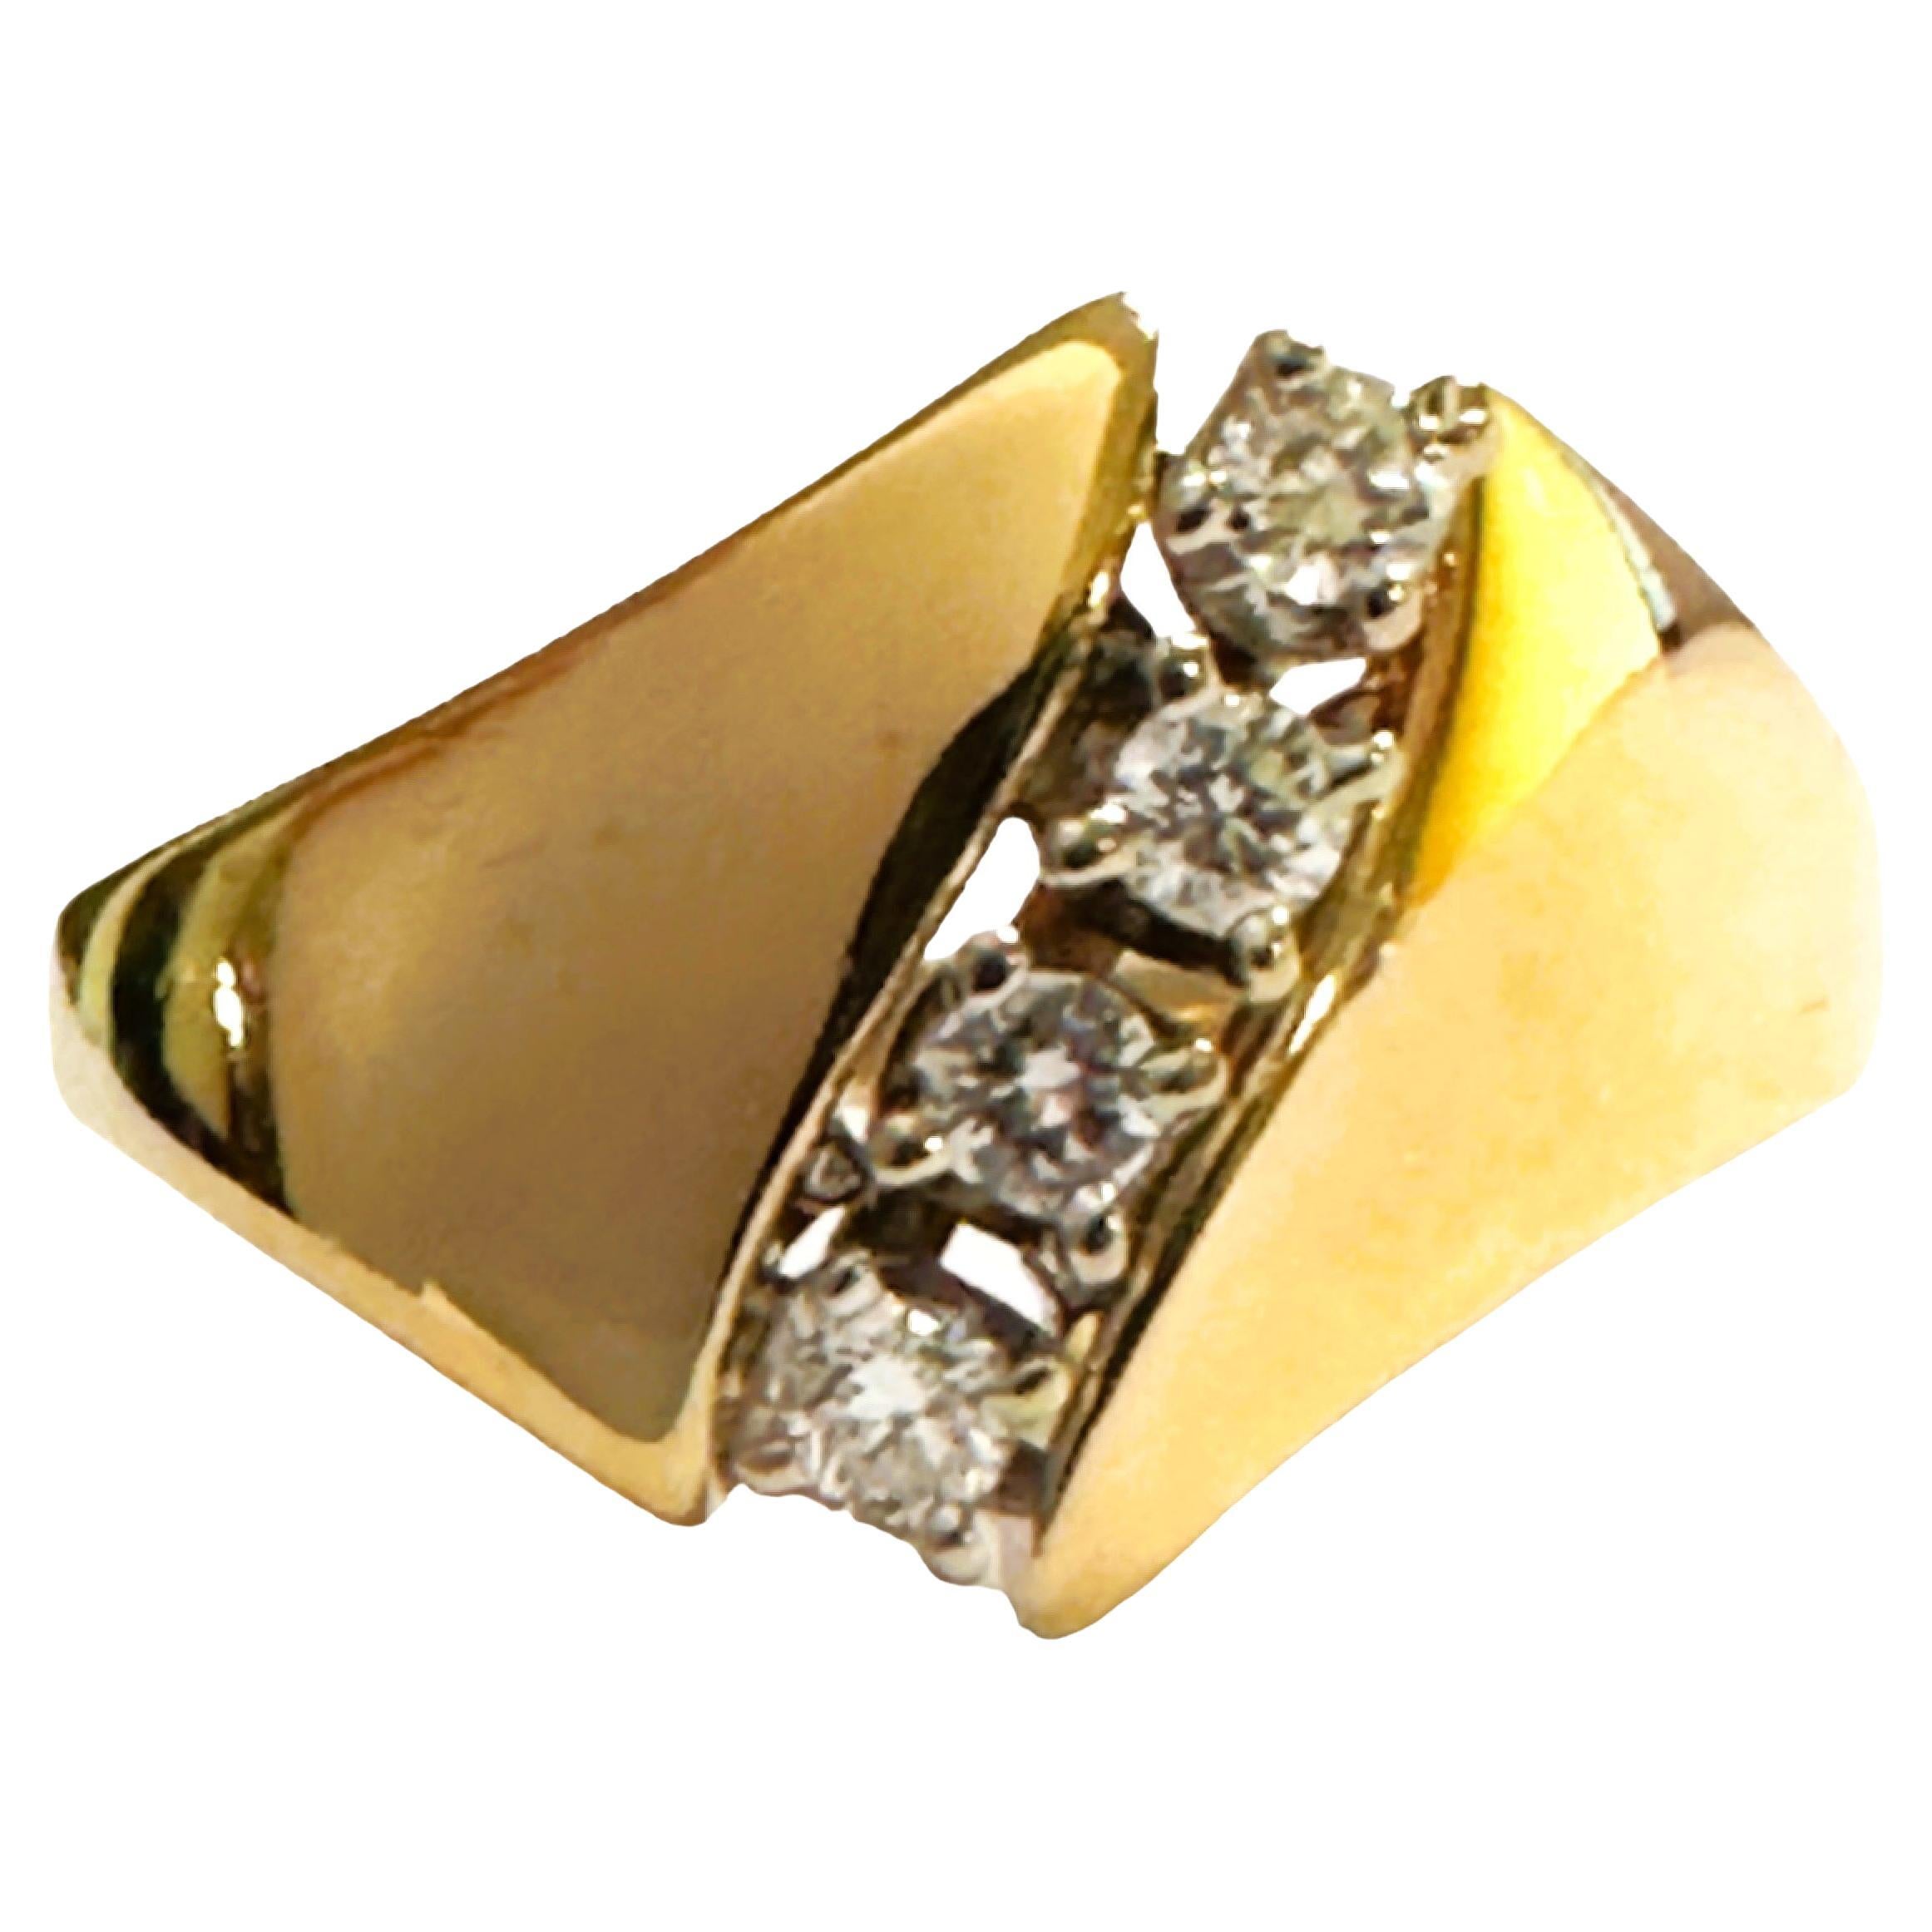 Louis Vuitton Volt Ring - 2 For Sale on 1stDibs